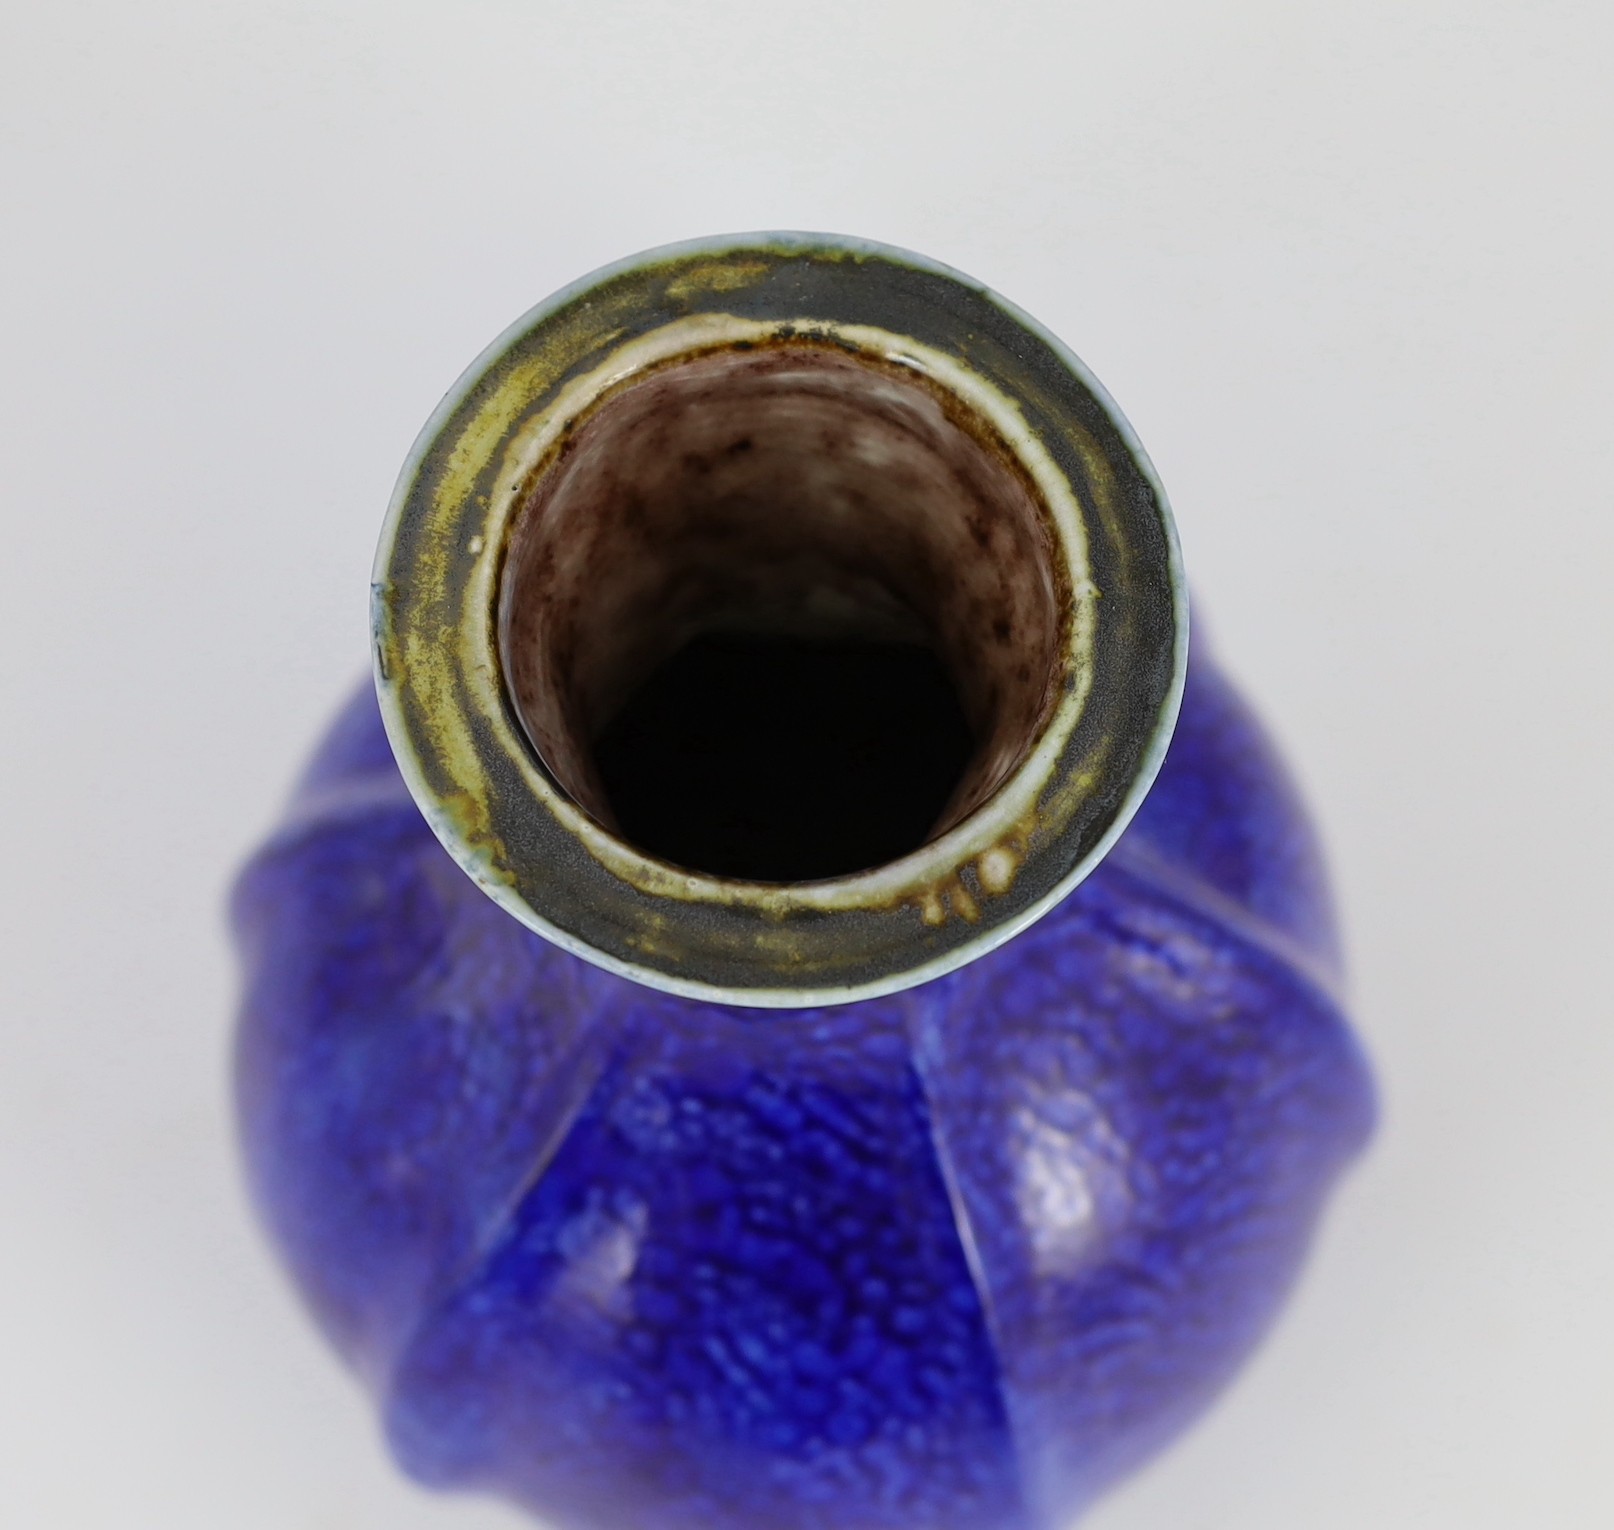 A Martin Brothers cobalt blue glazed vase, early 20th century, 24.5cm high